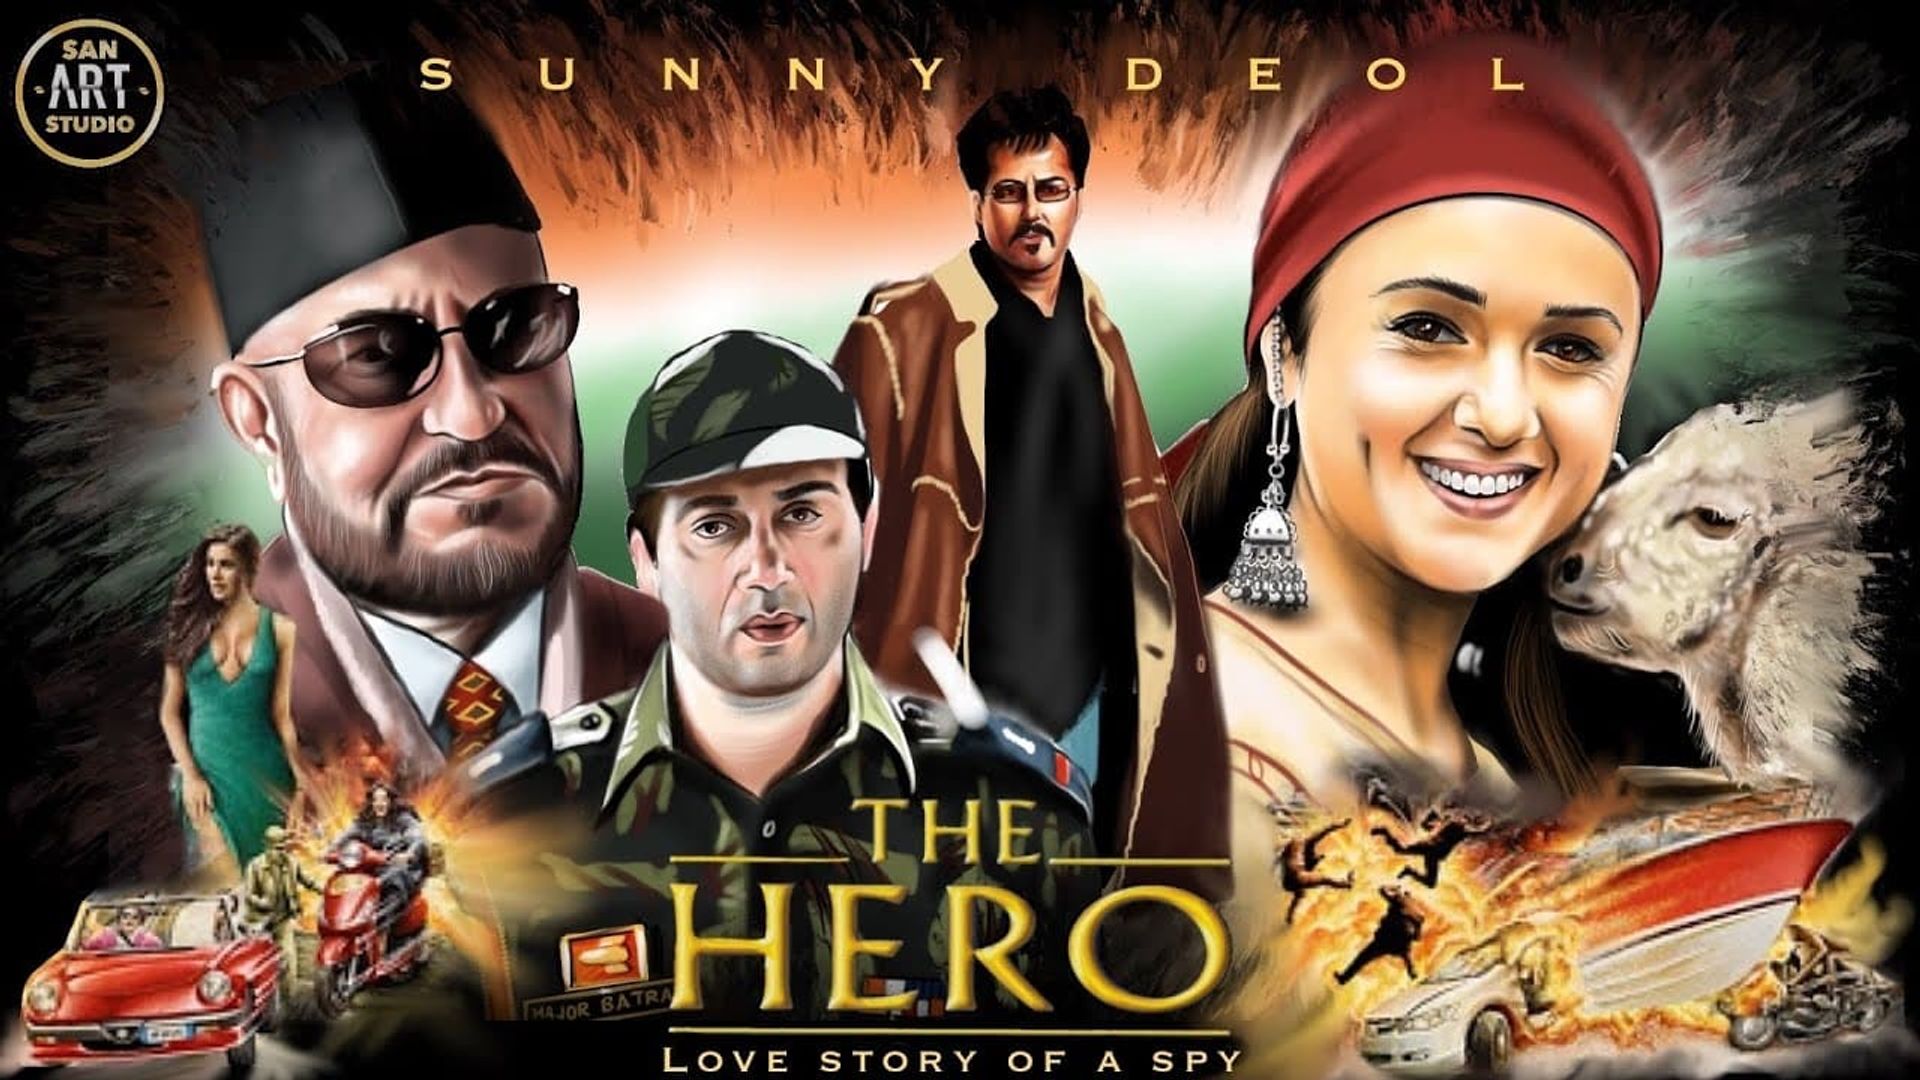 The Hero: Love Story of a Spy background